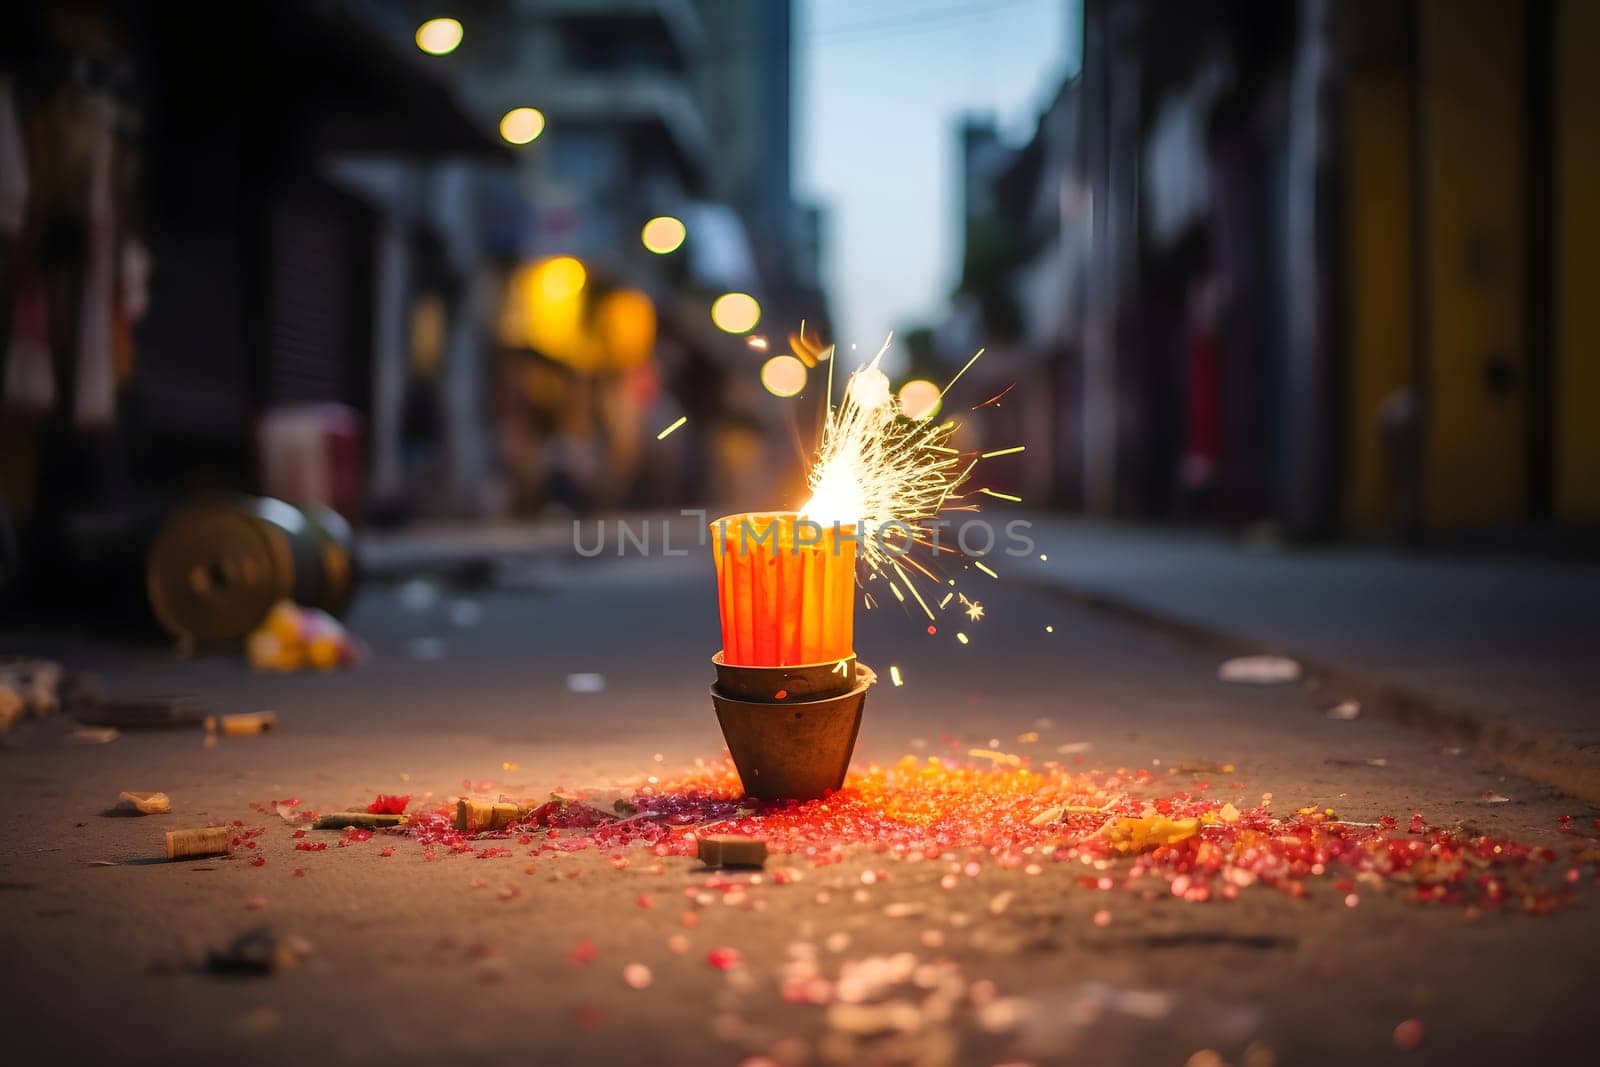 Happy Diwali - Lit diya lamp on street with firecrackers, neural network generated photorealistic image by z1b